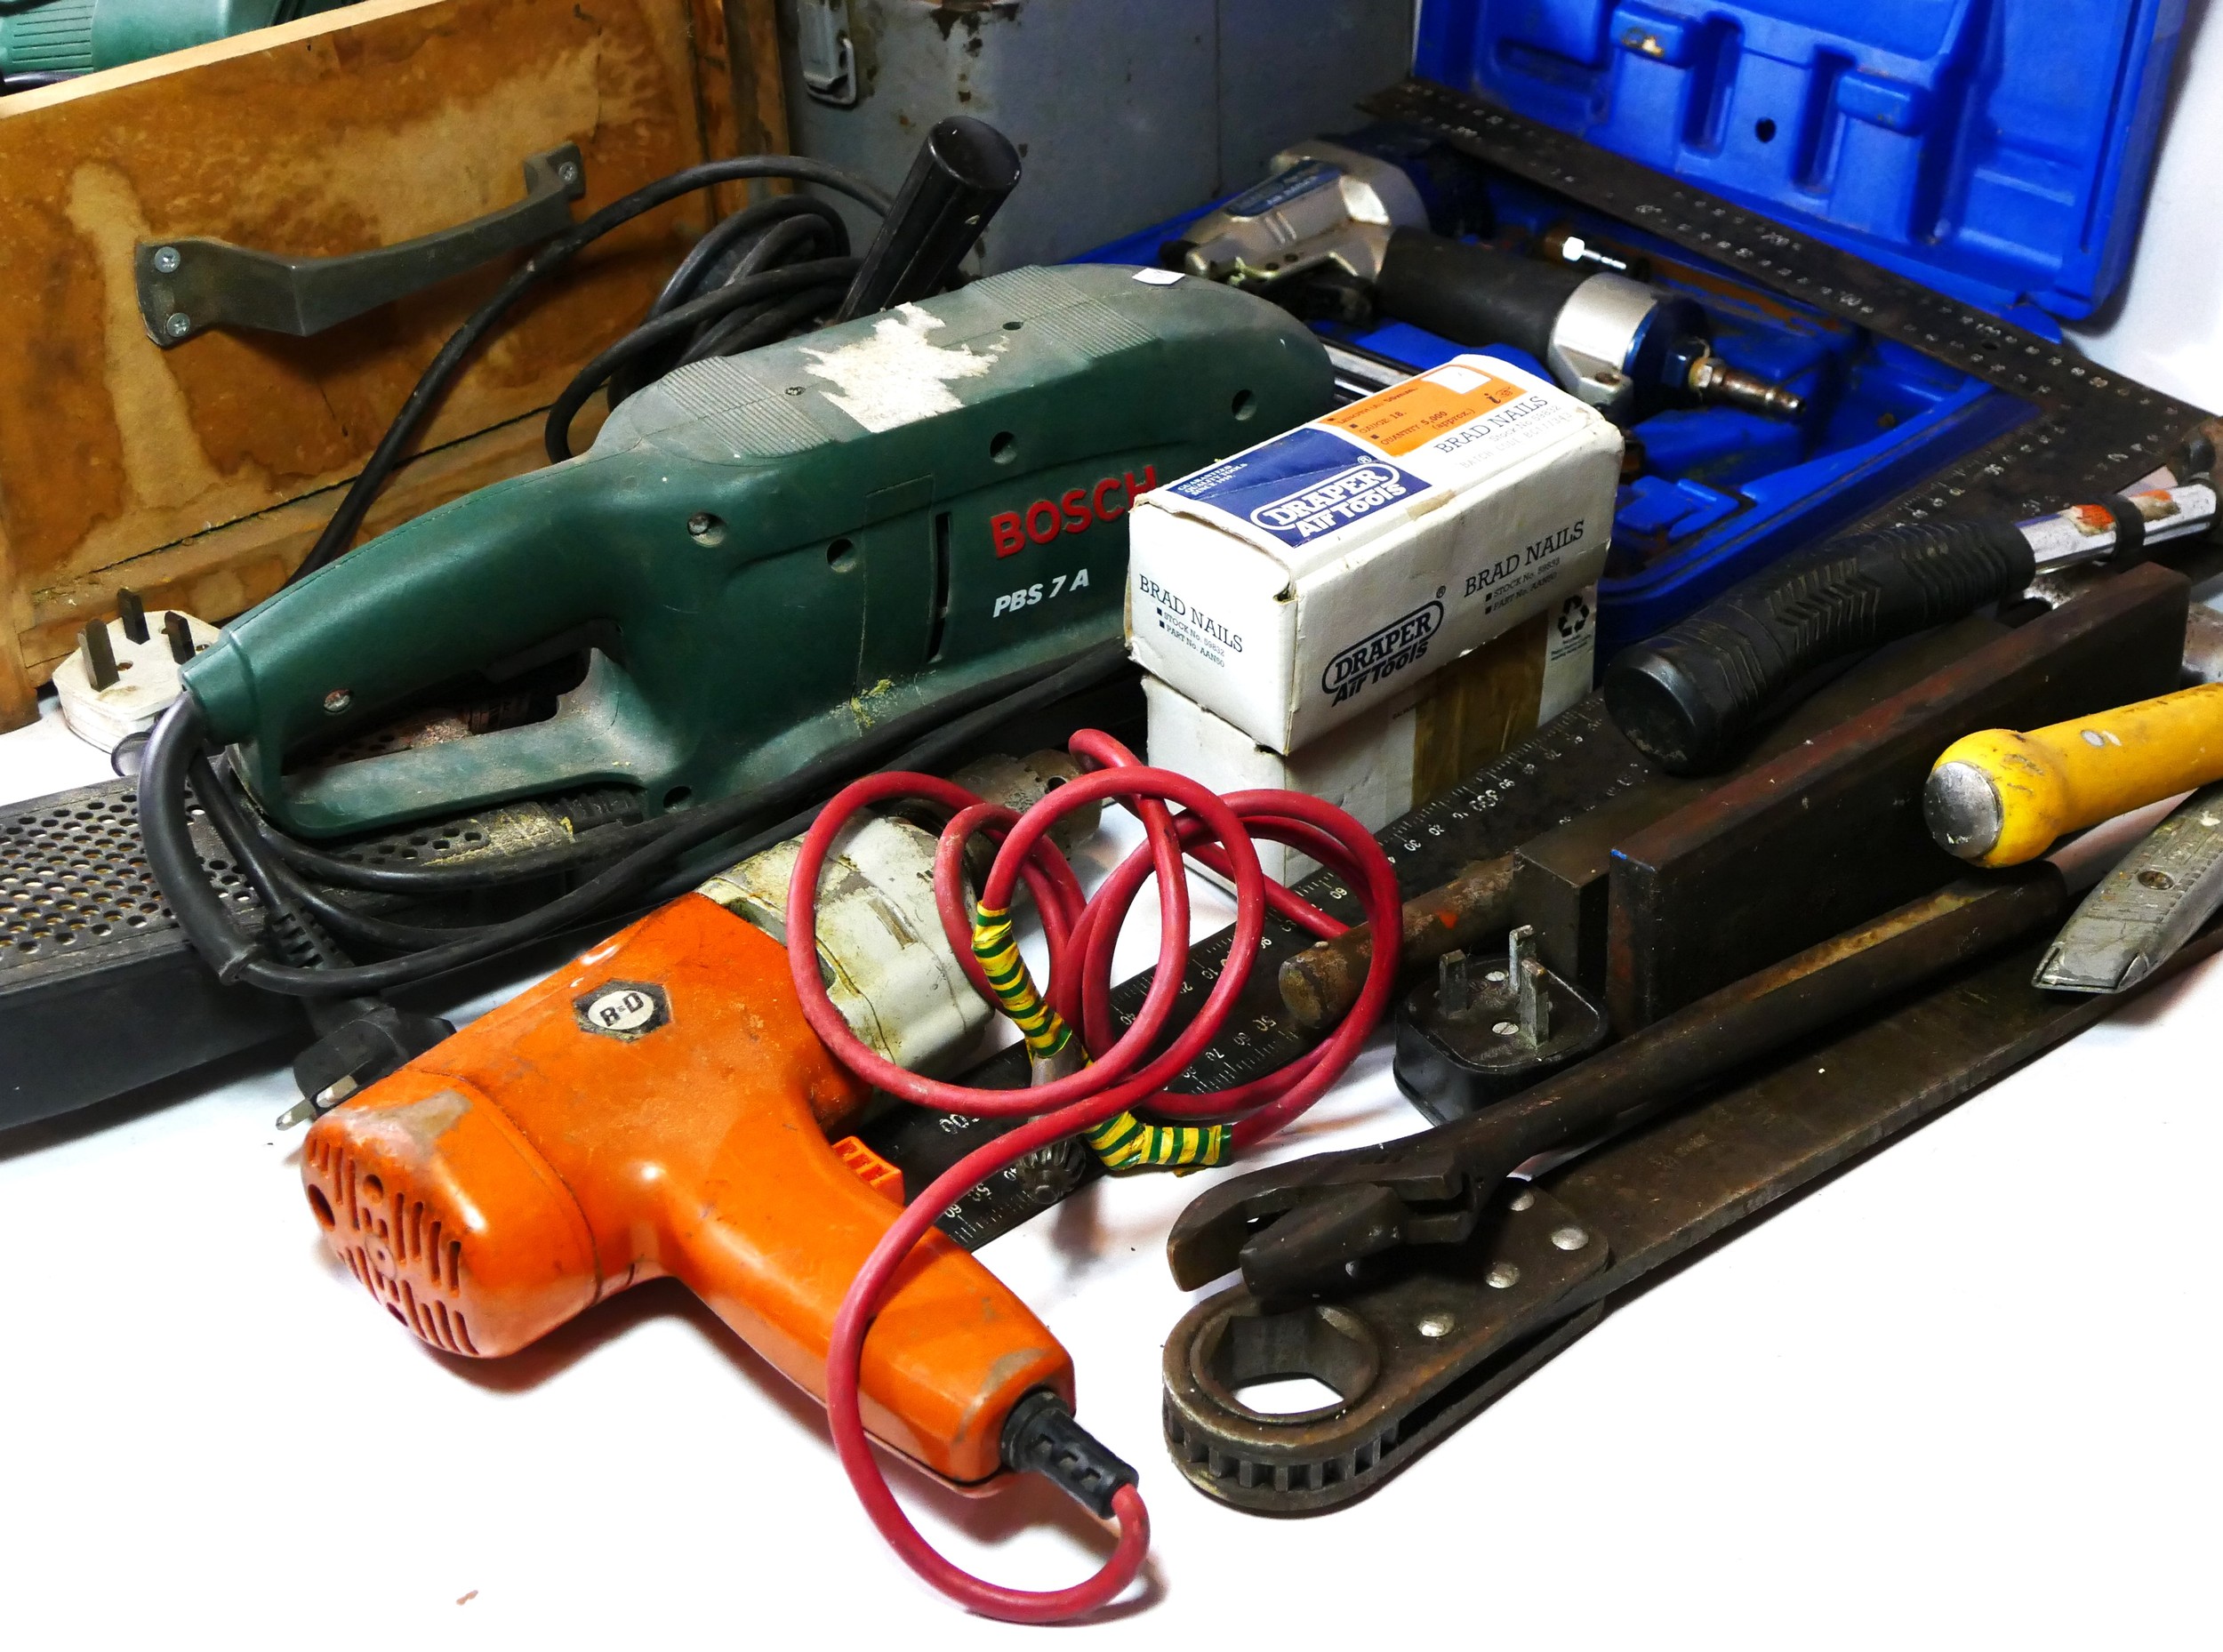 A collection of power tools and hand tools to include a Bosch sander, a grinder, a Elu planer, a - Image 2 of 4